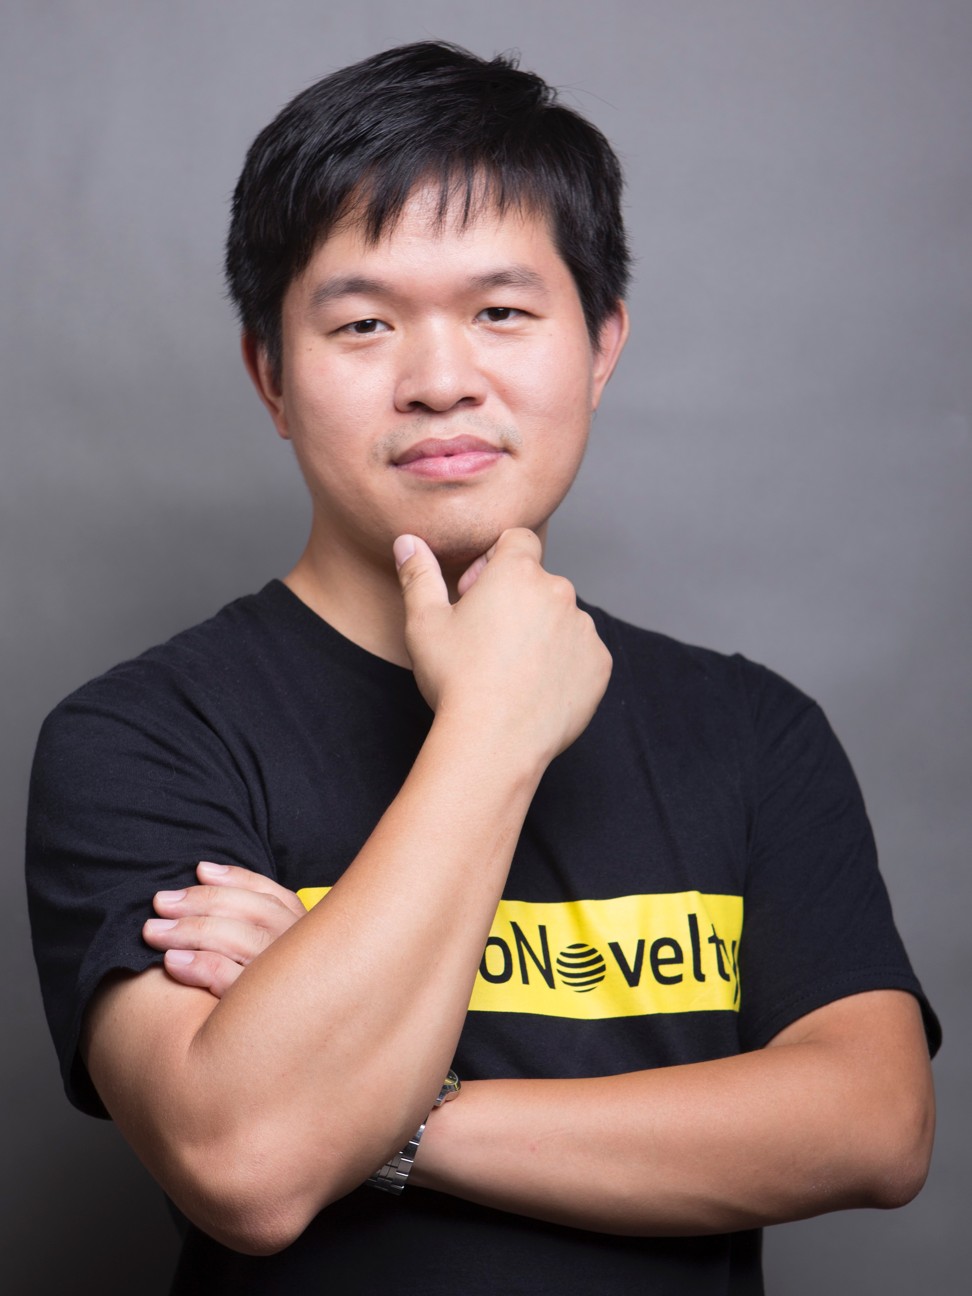 MicroNovelty CEO Oliver Sun is the brains behind marketing innovative new gadgets like the heelight through crowdfunding.